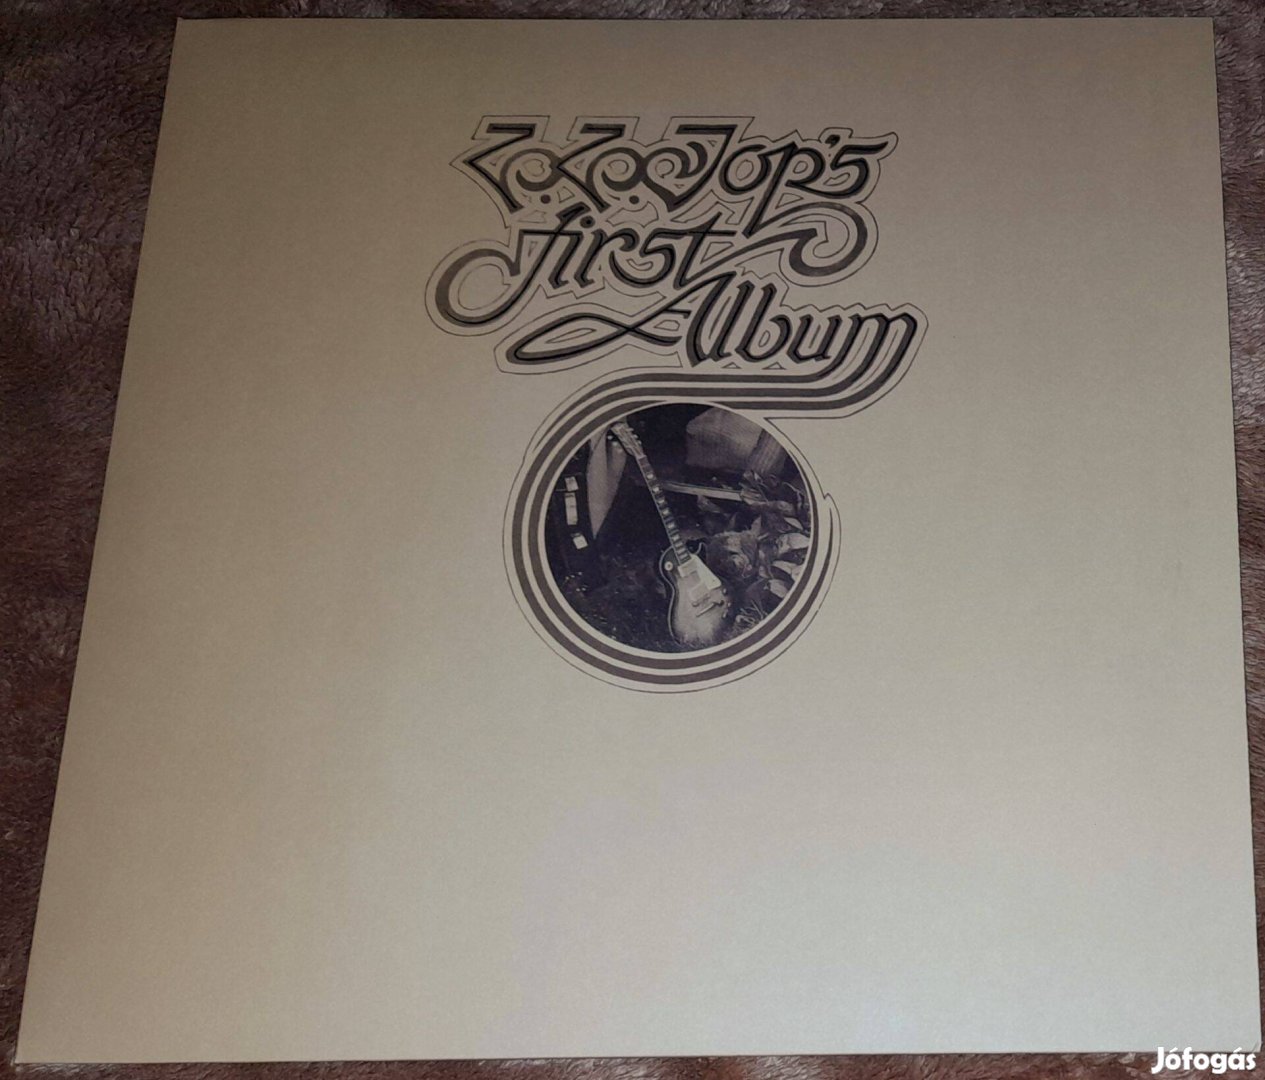 ZZ Top - Cinco: The First Five LPs (5 LP Box)